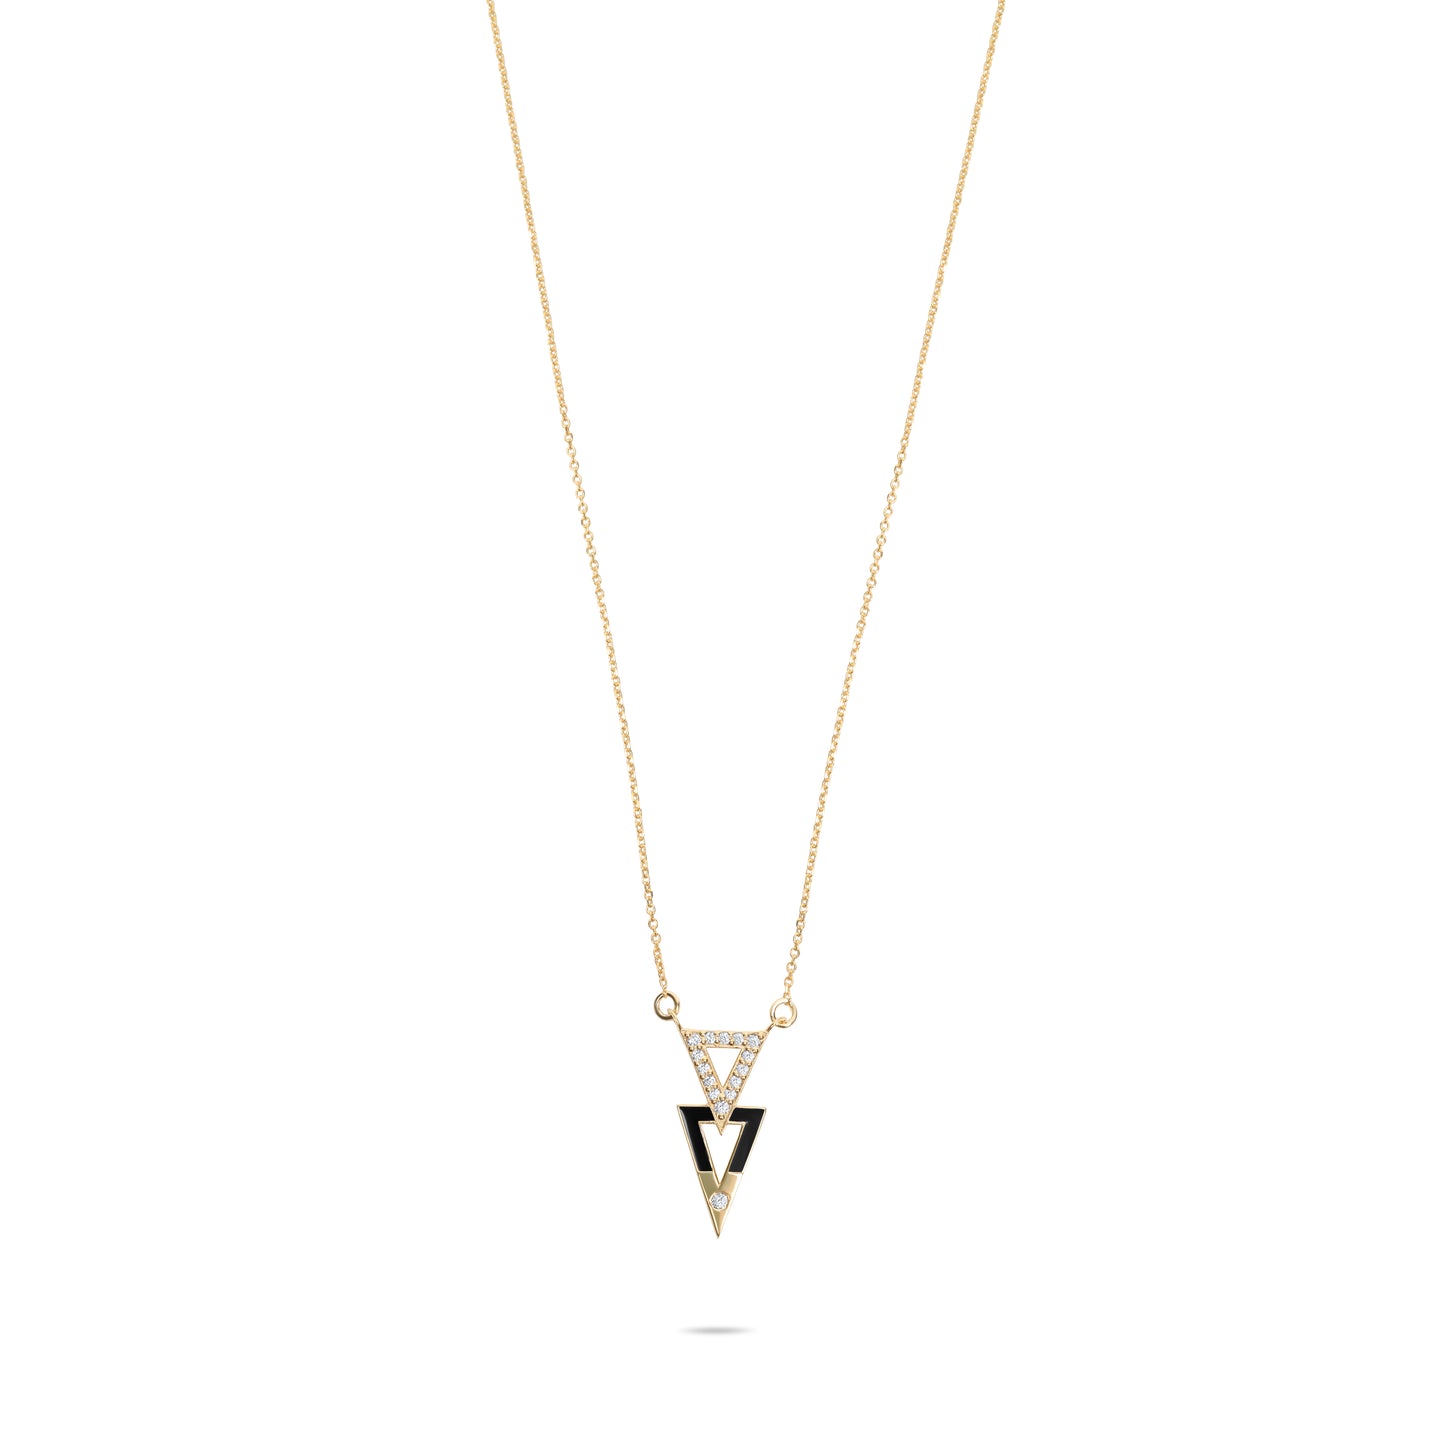 Black Enamel Double Triangles Necklace  - Gold Plated